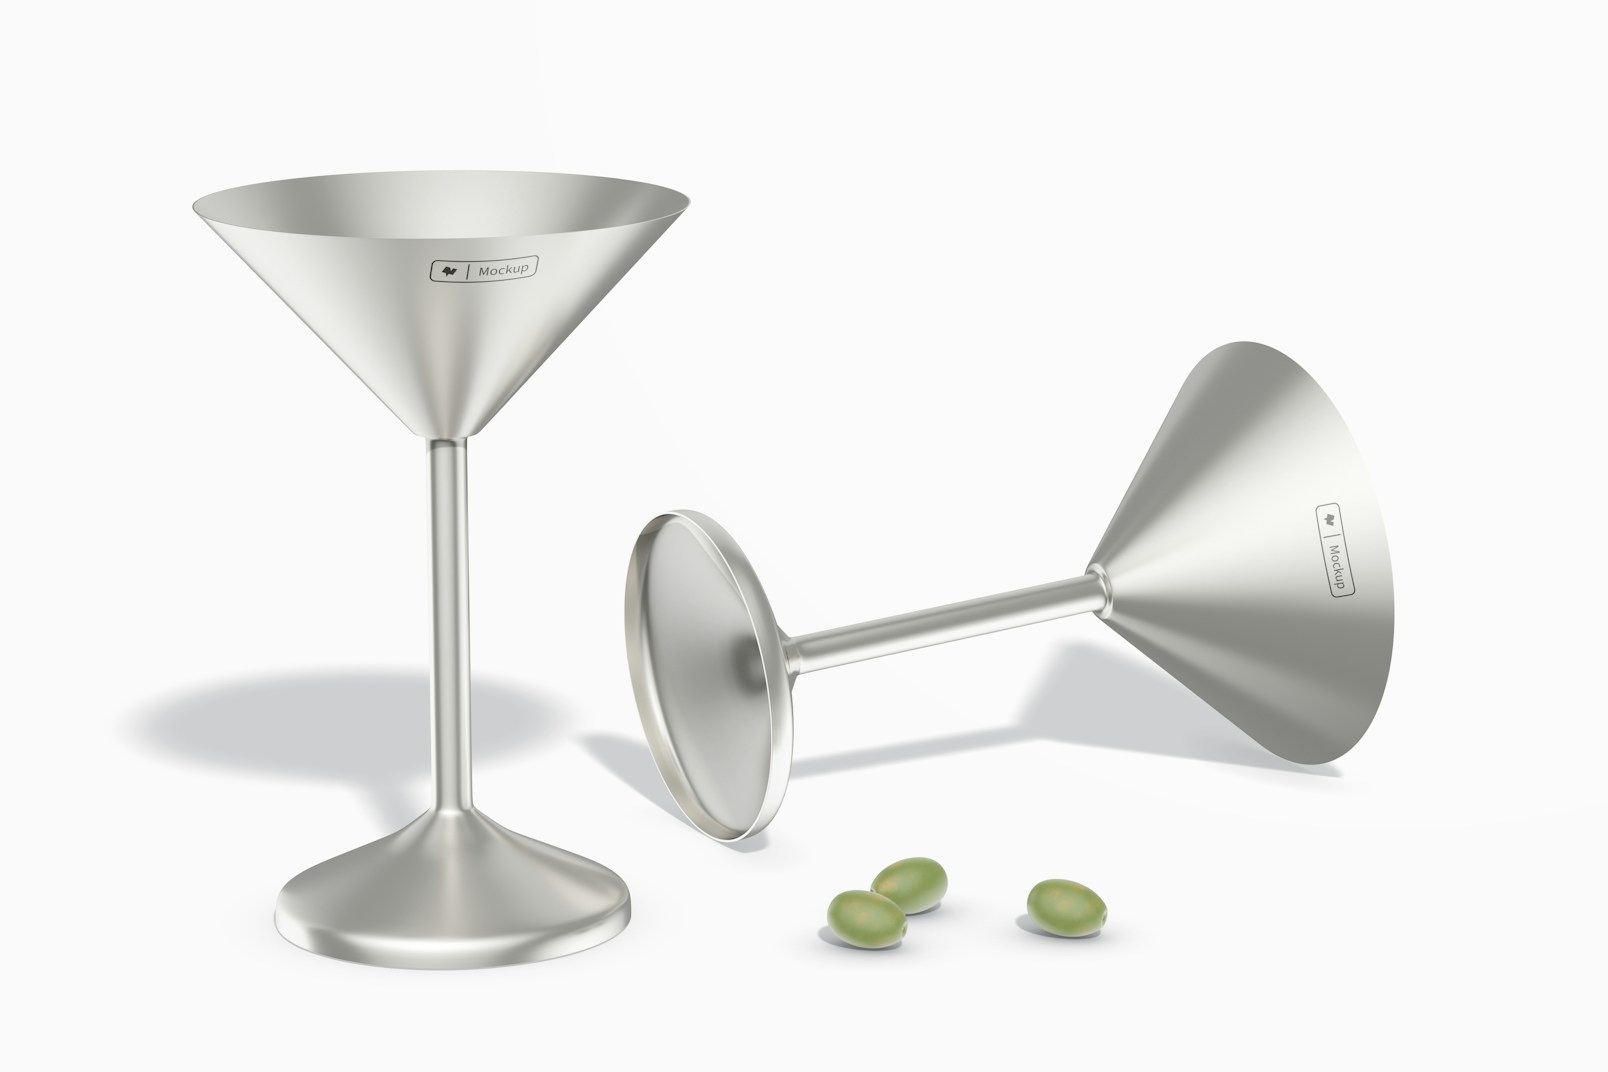 Stainless Steel Martini Glasses Mockup, Dropped